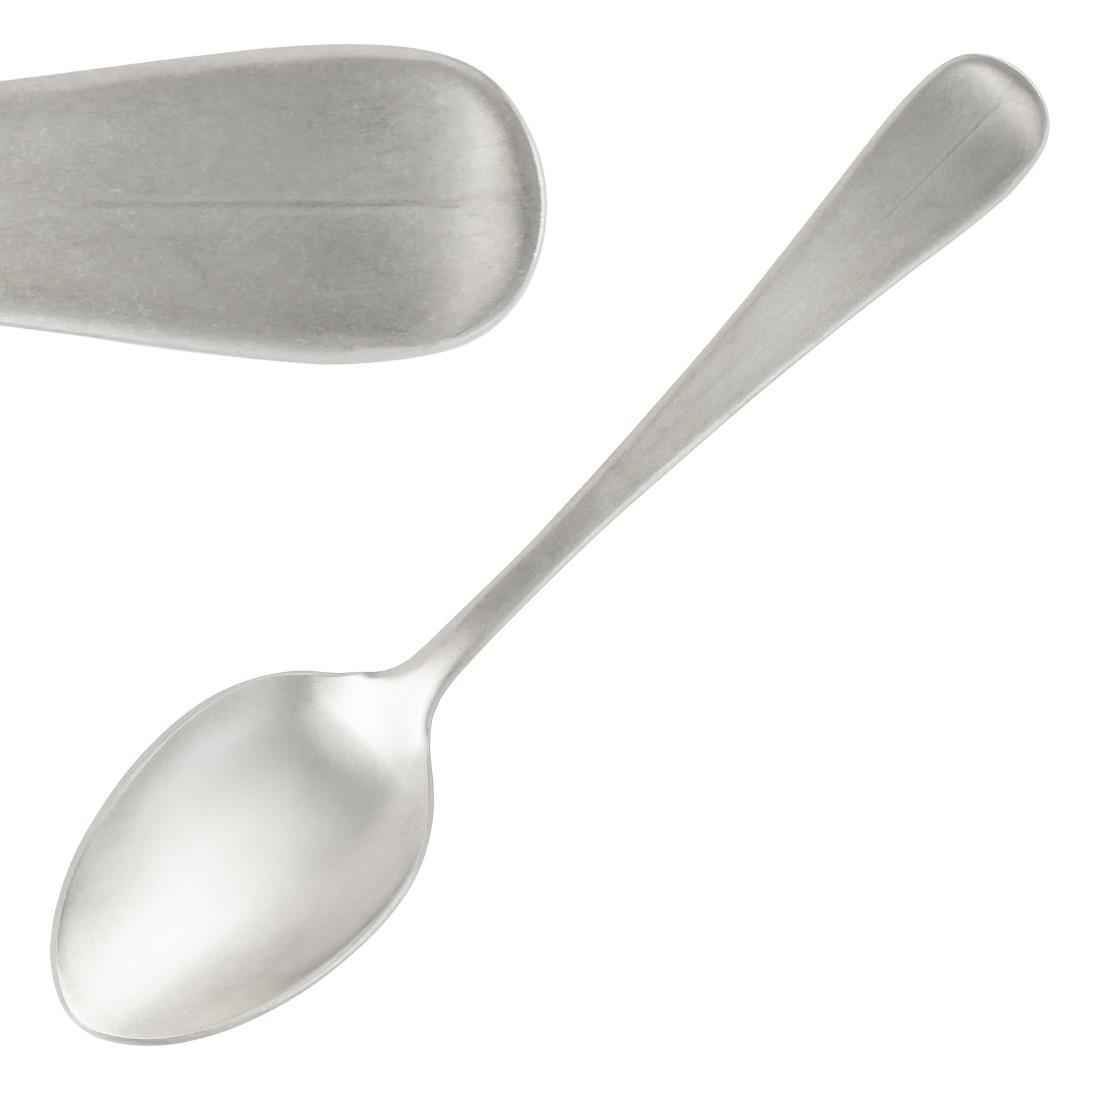 Pintinox Baguette Stonewashed Dessert Spoon (Pack of 12) - GN783  - 1